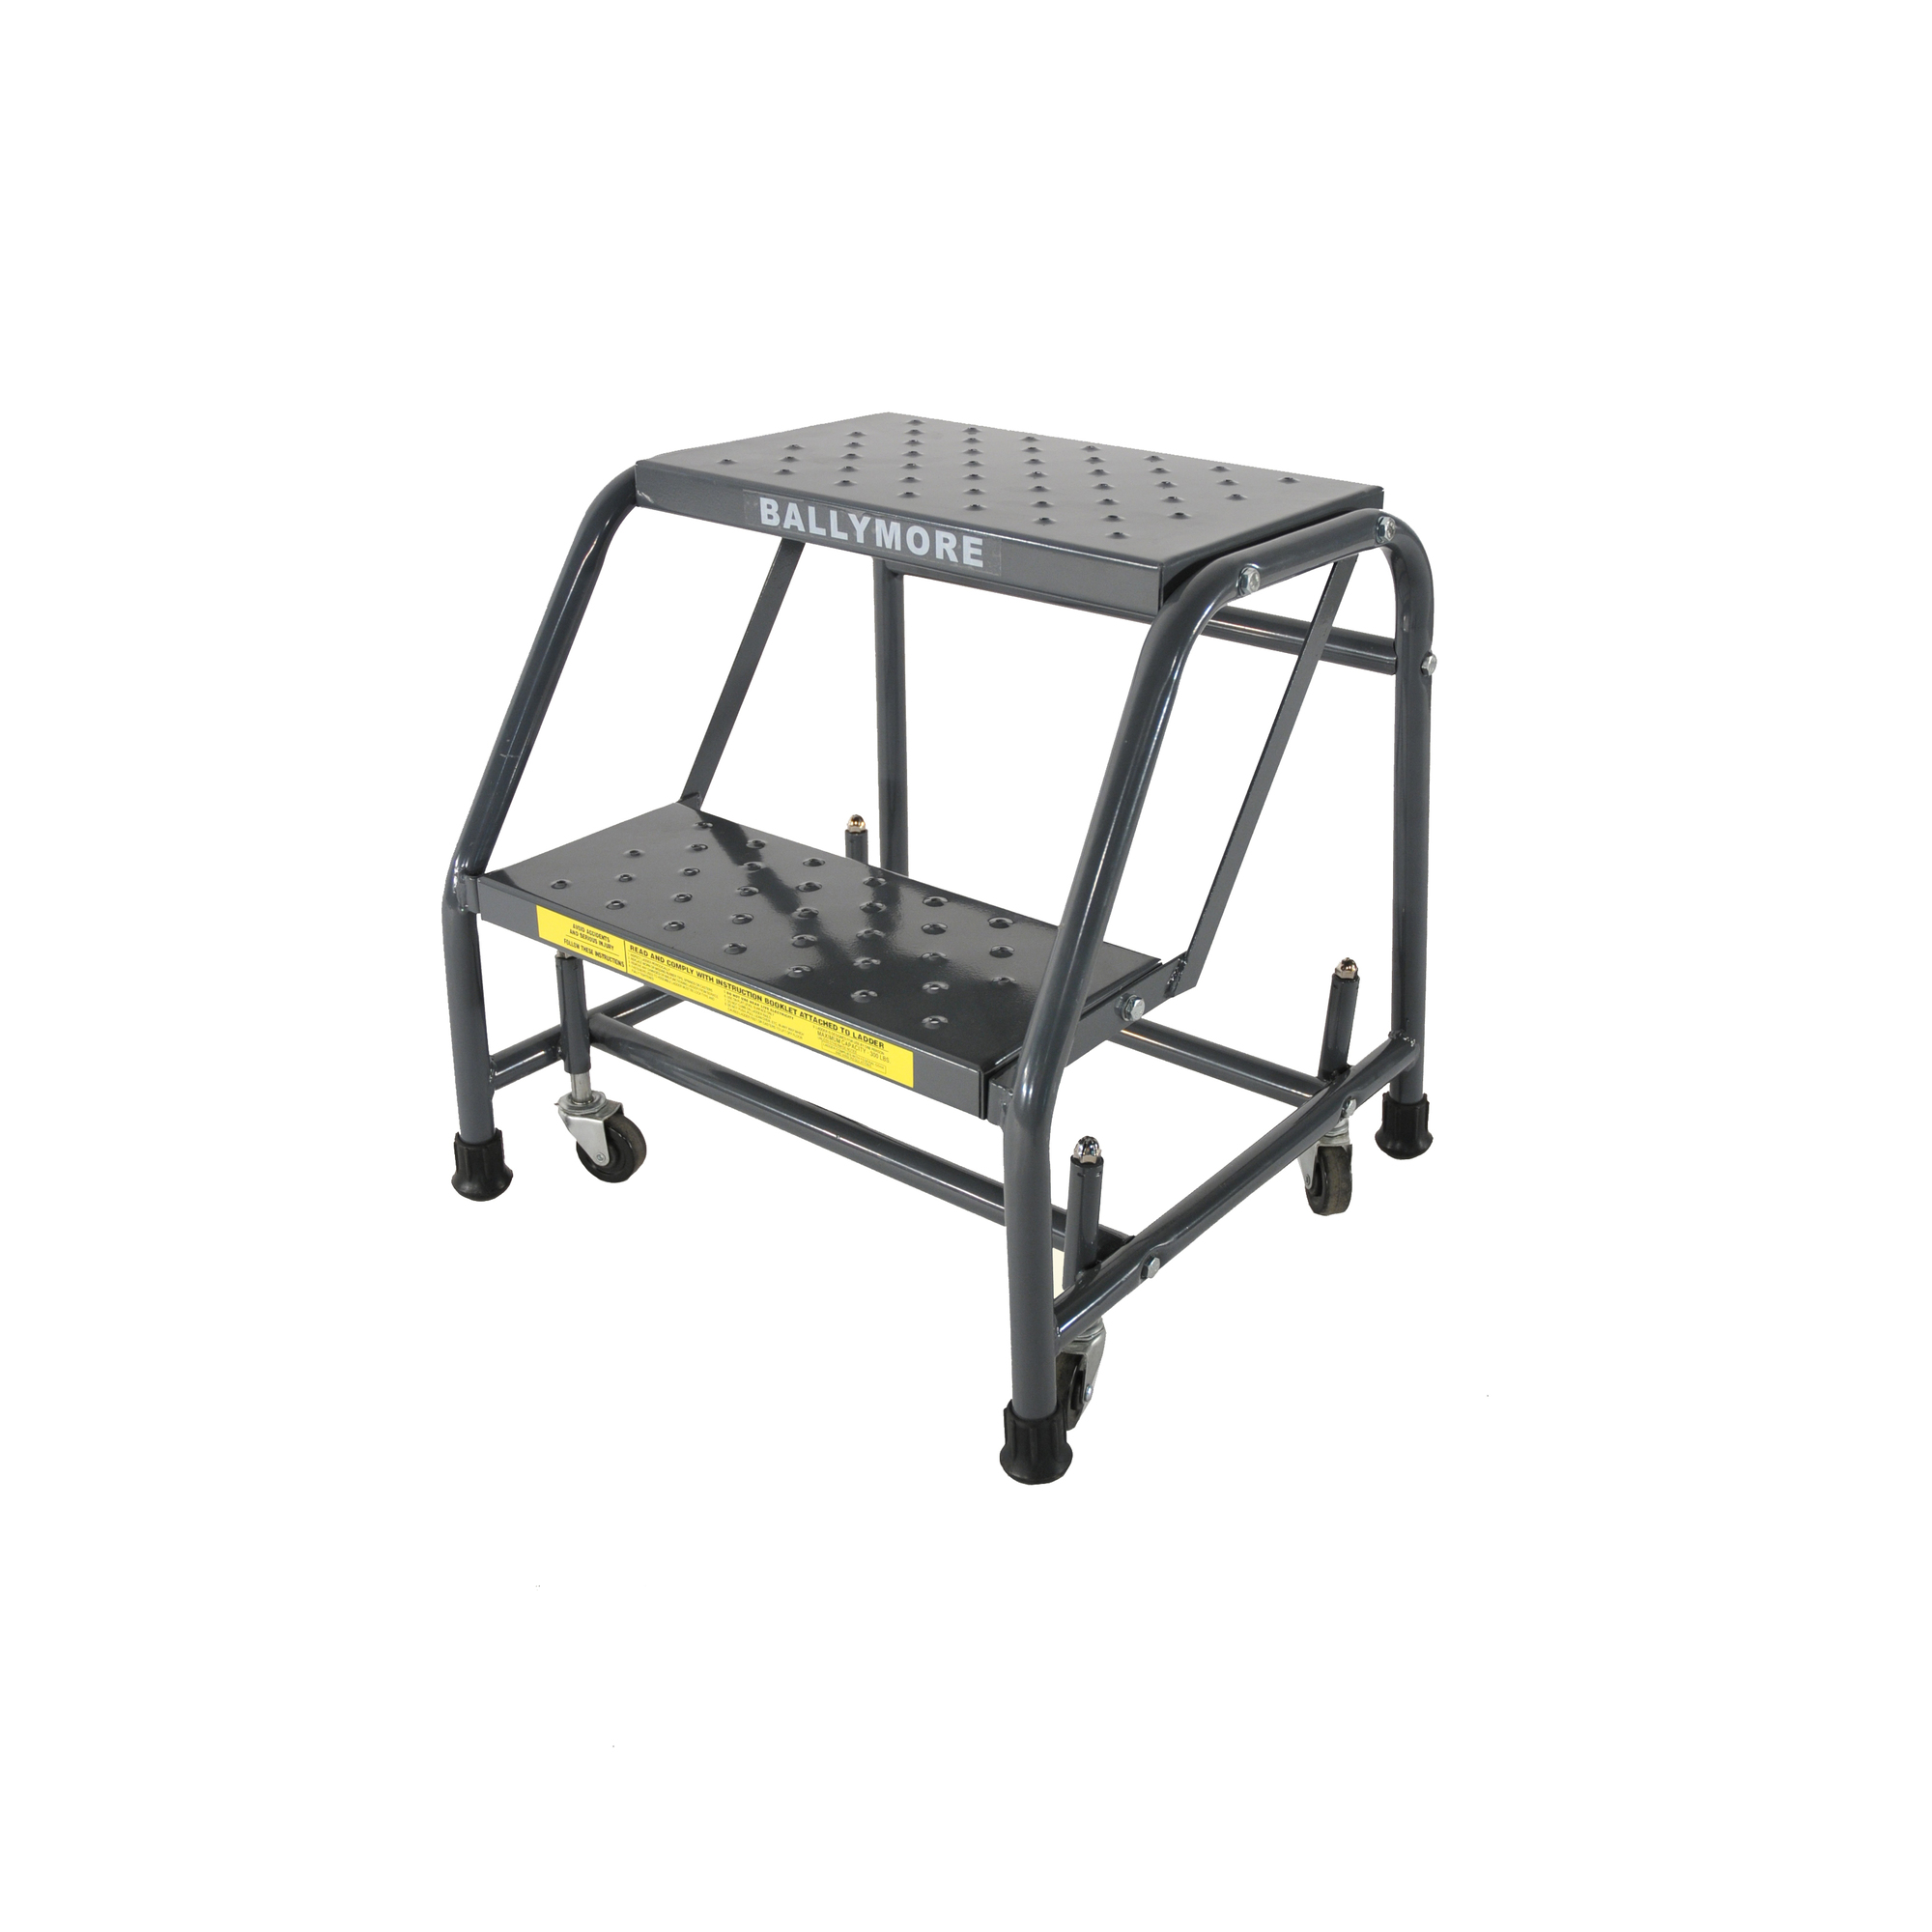 Ballymore, Rolling Ladder, Overall Height 19 in, Steps 2, Material Steel, Model 218P